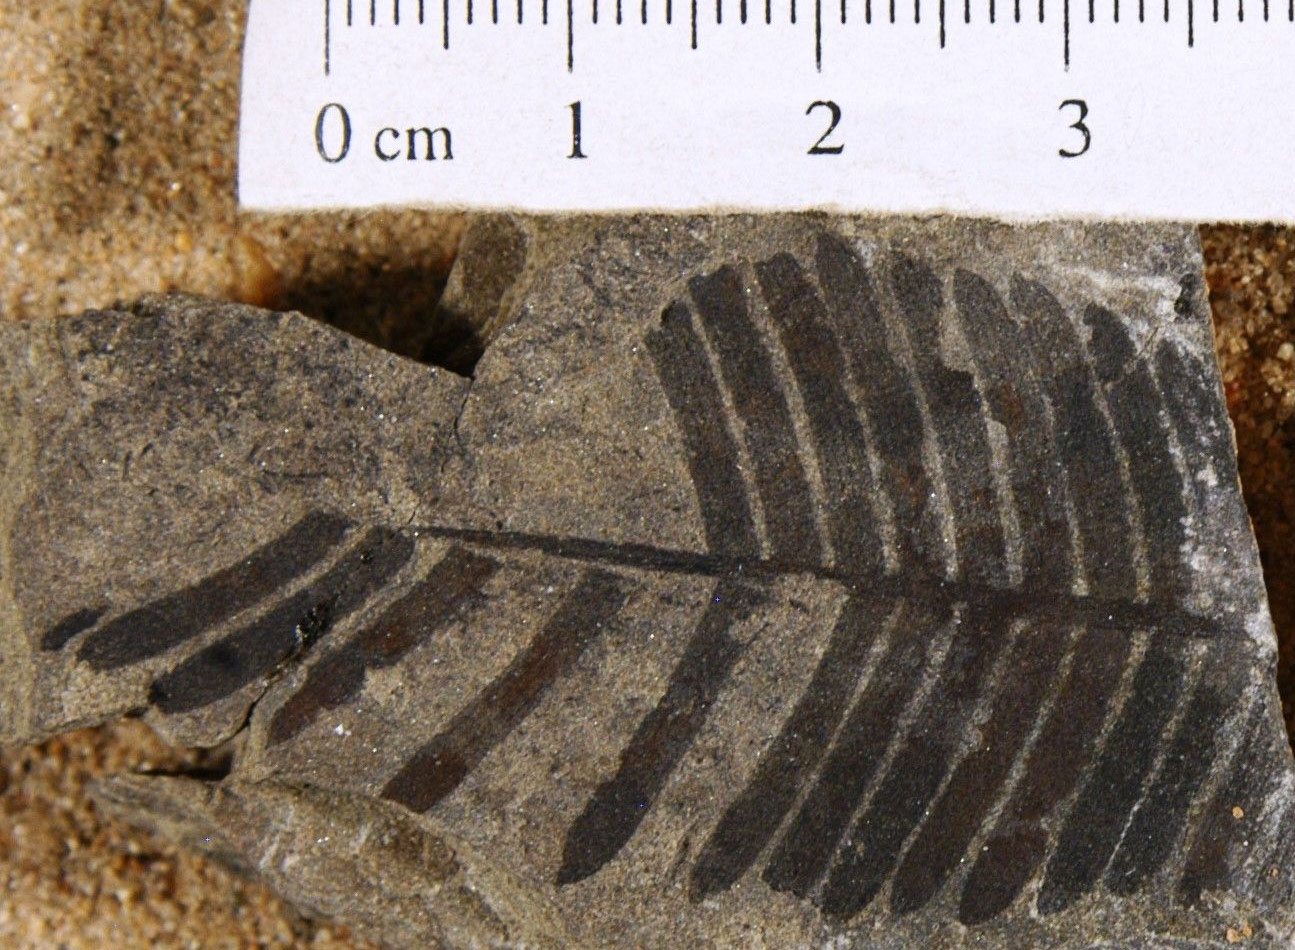 Photograph of a fossil cycadeoid leaf from the Early Cretaceous of Washington. The leaf consists of a central rachis (stalk) with lateral pinnae (leaflets). This specimen is a little more than 3 centimeters long.